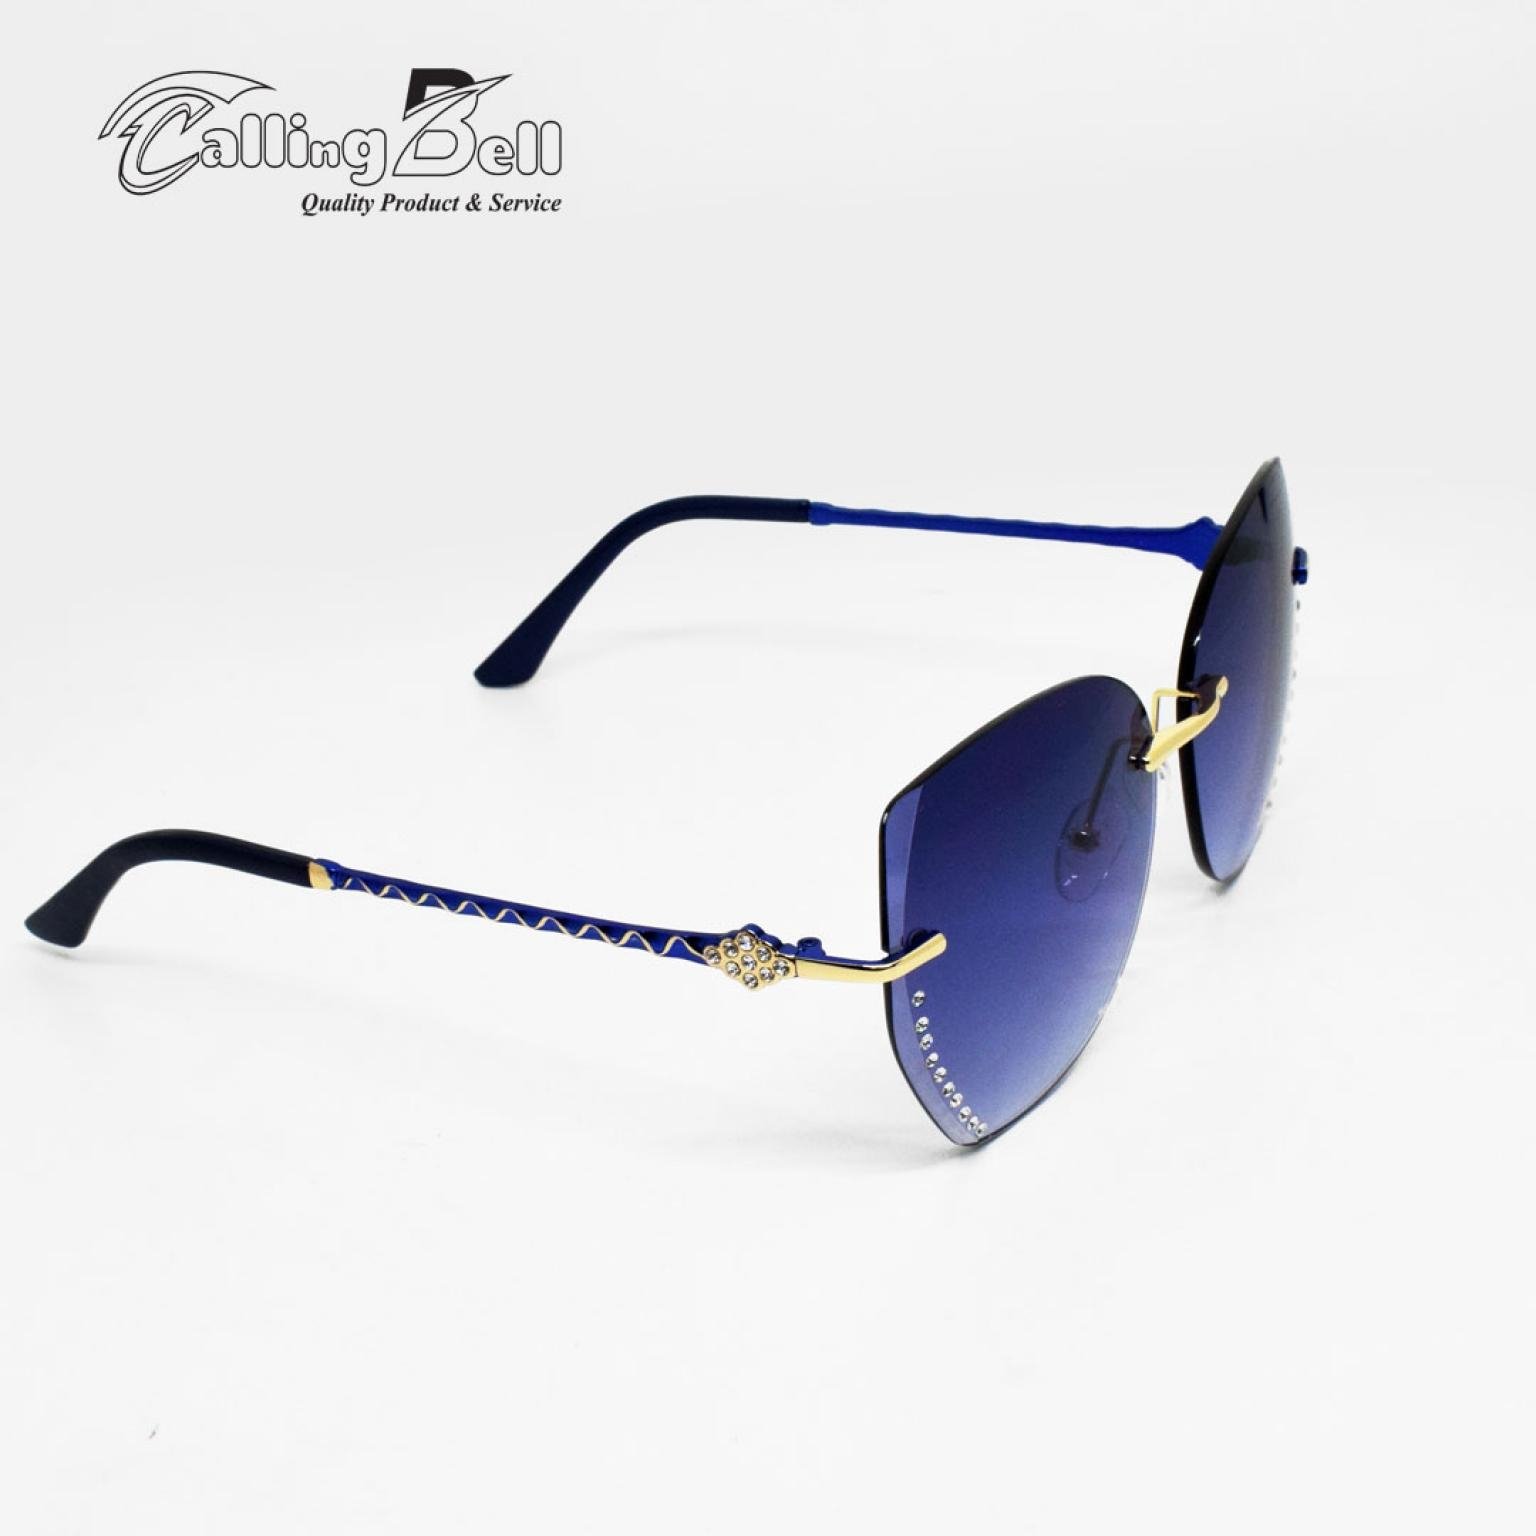 BIG FRAME MOST TRENDY SUNGLASS BROWN BLUE LENS WITH DESIGNED FRAME FOR WOMEN STONE PUTTING